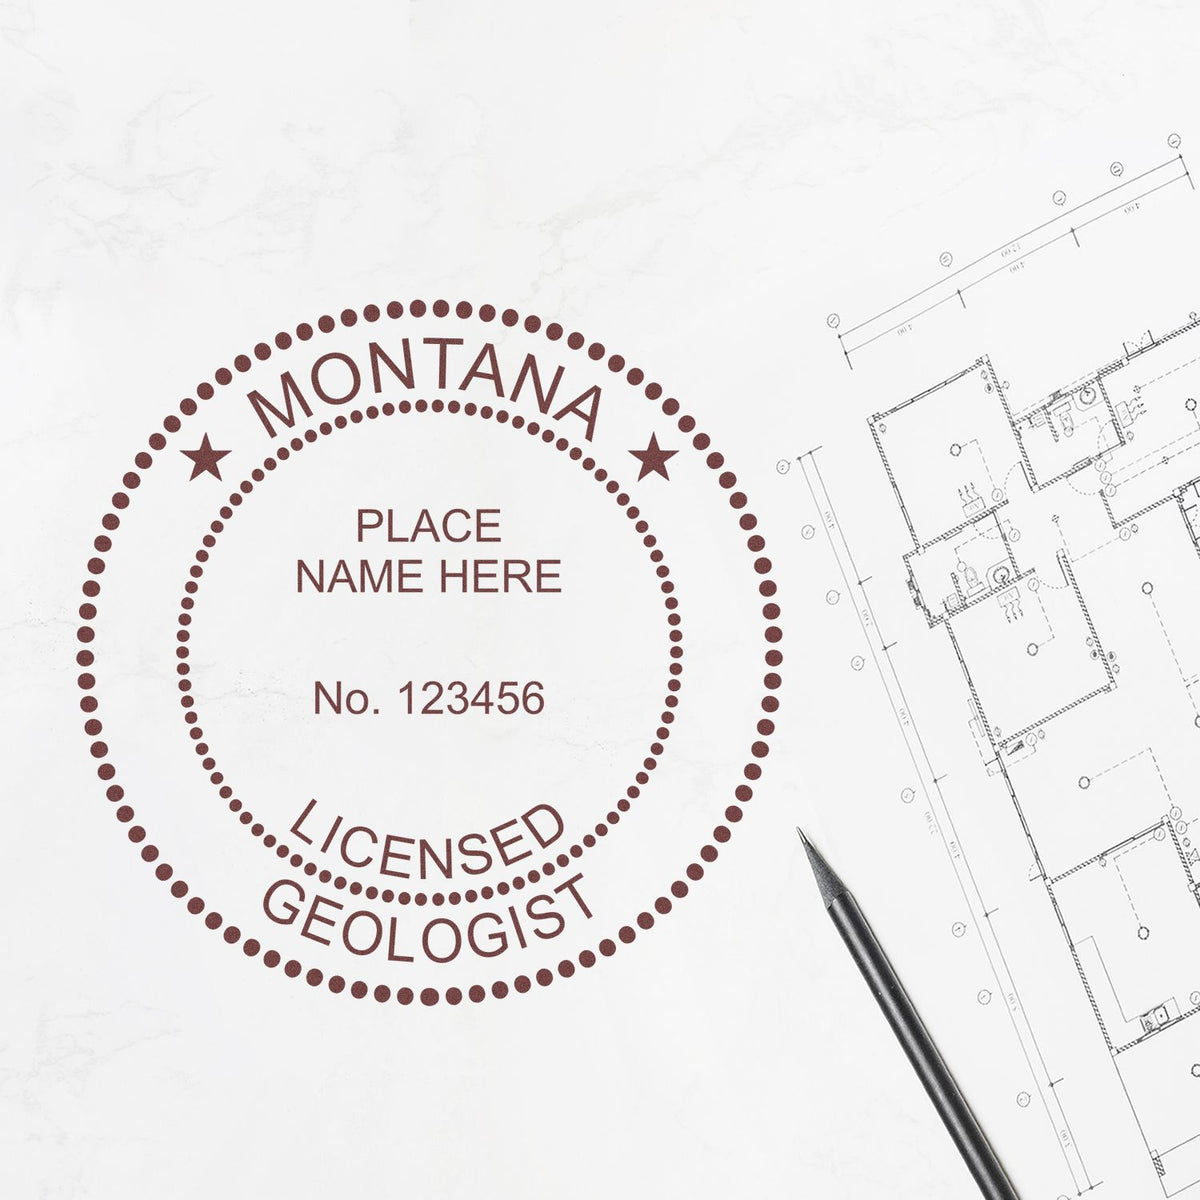 Another Example of a stamped impression of the Montana Professional Geologist Seal Stamp on a office form